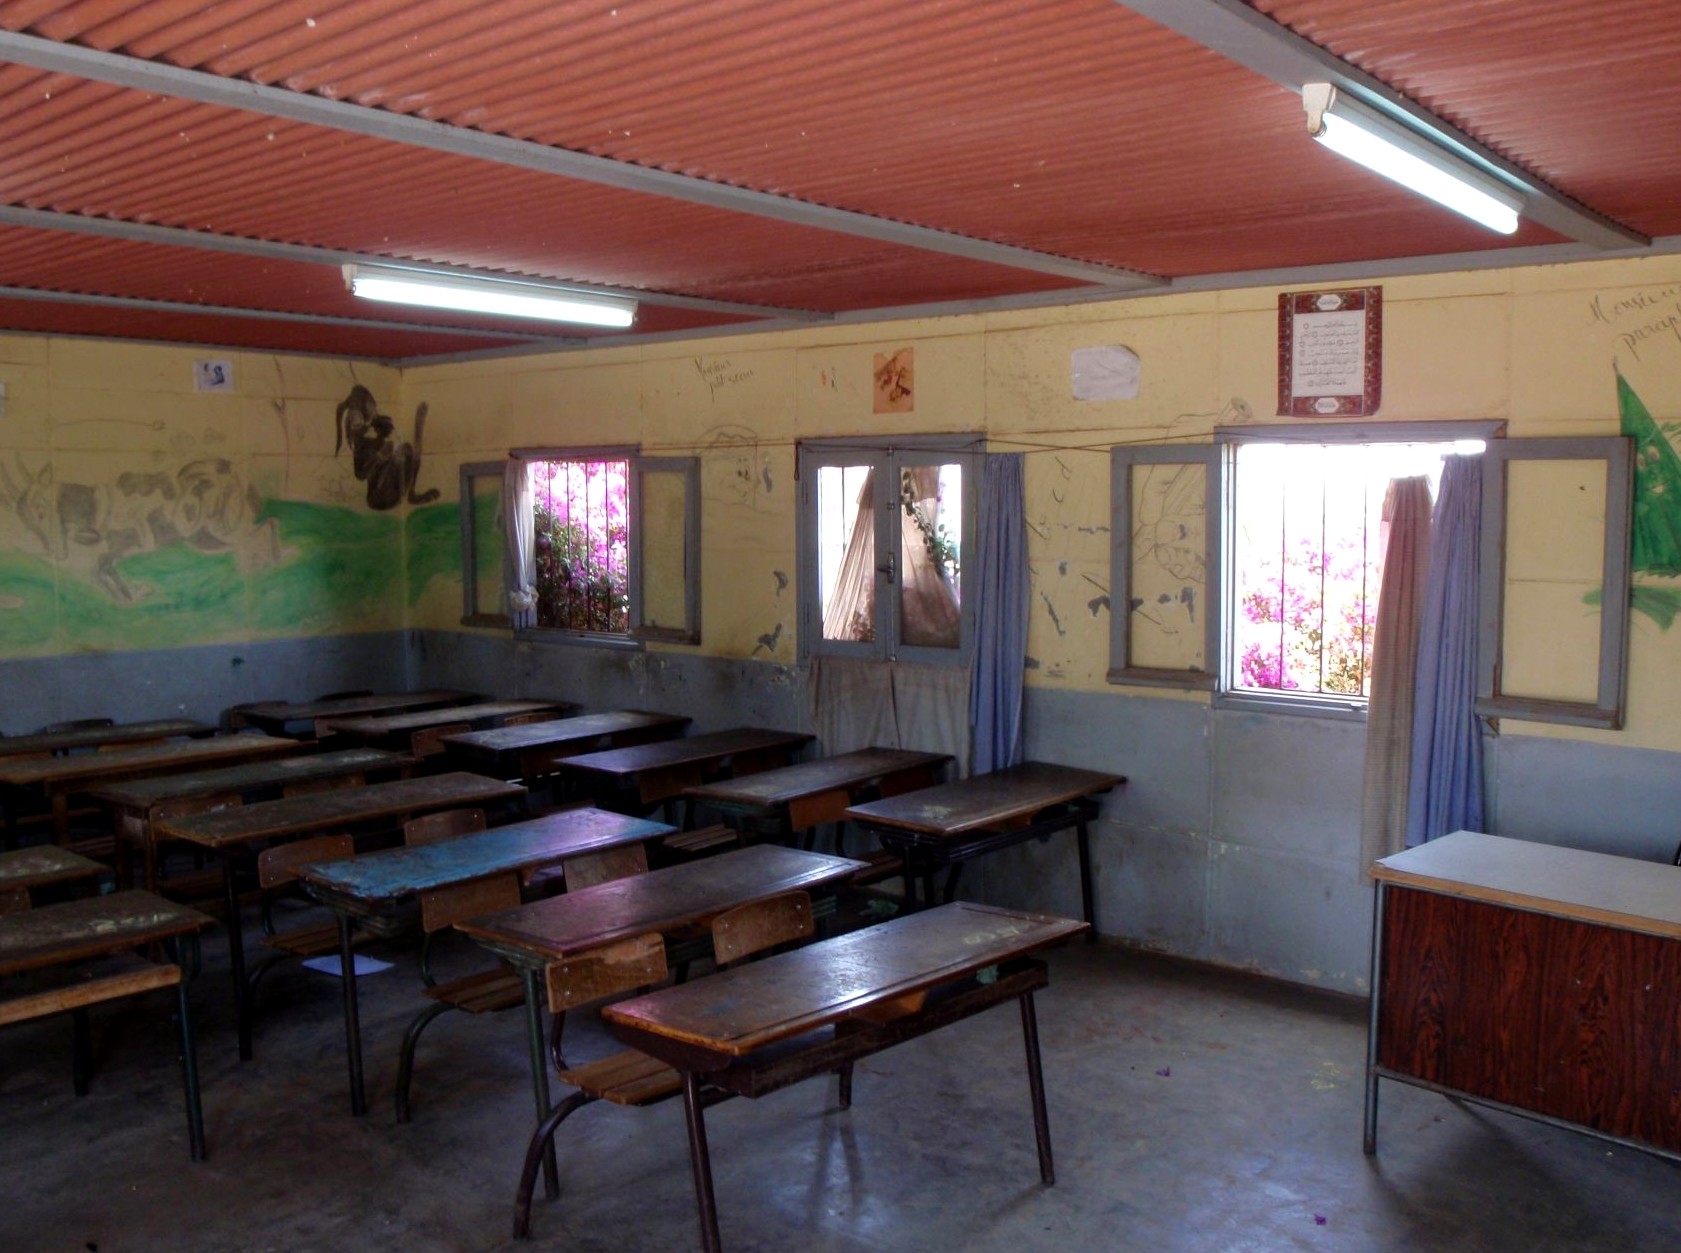 Former classroom of the school in Ouled Ahmed